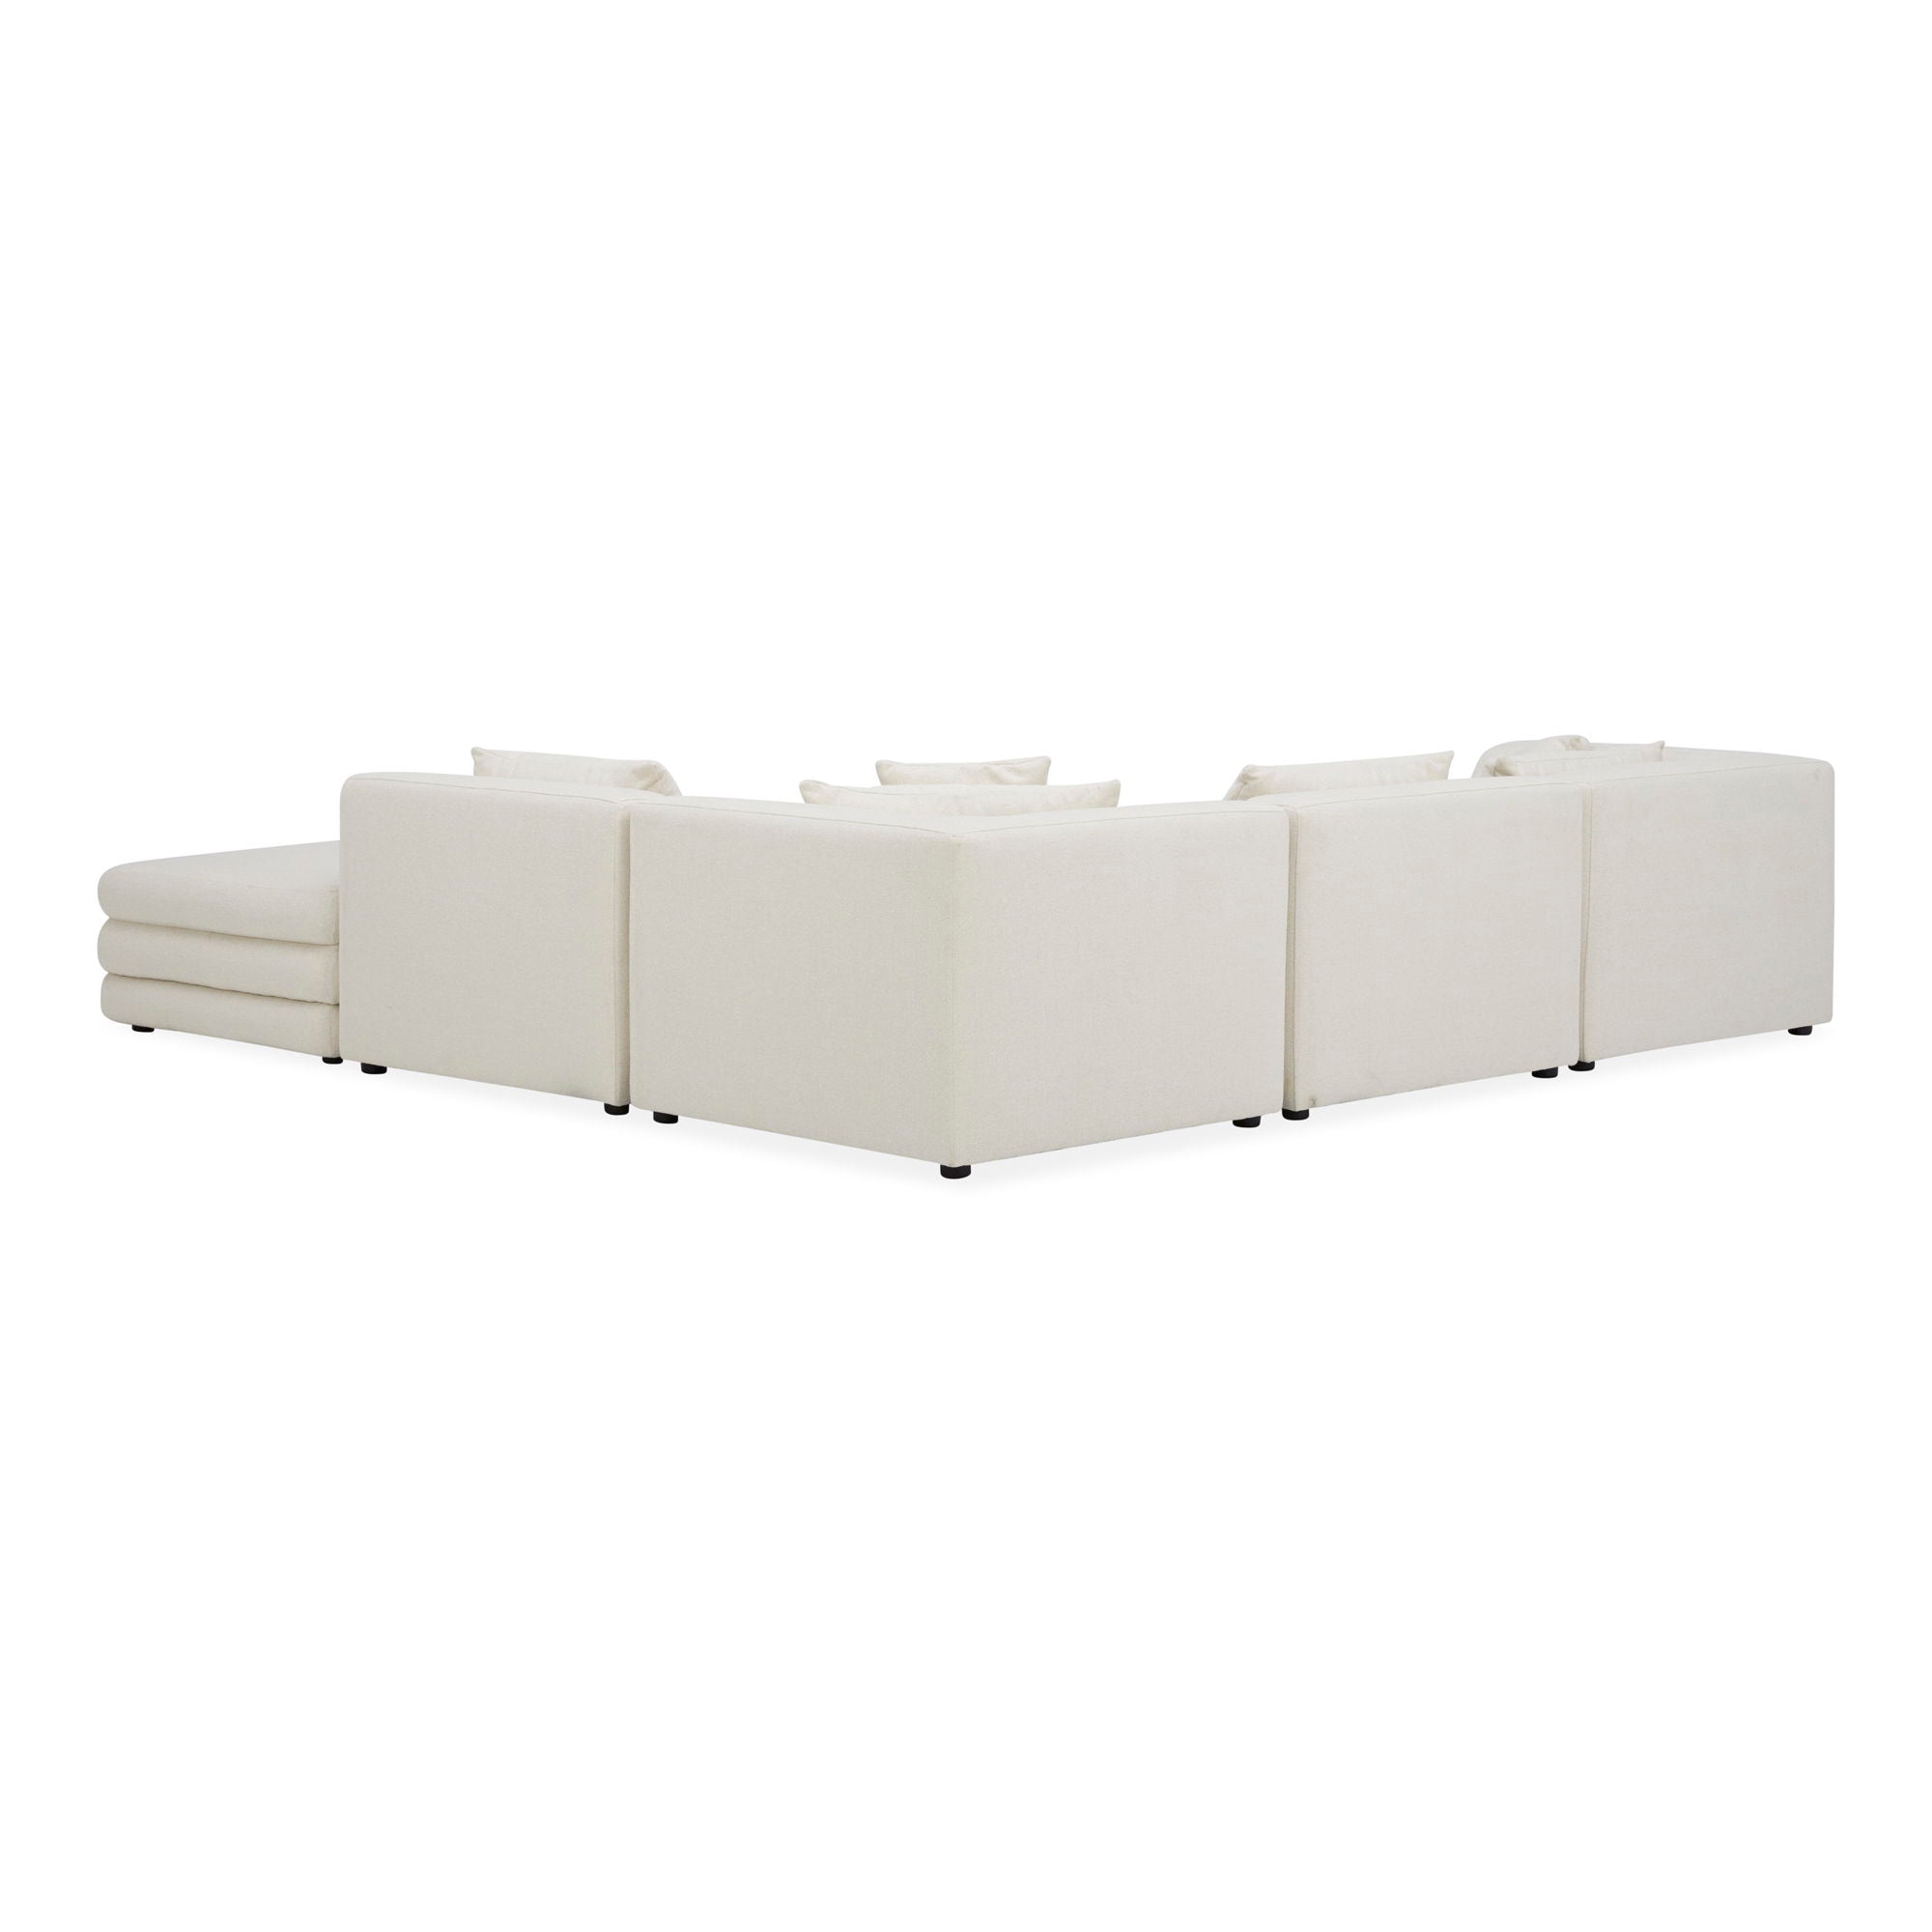 Lowtide - Dream Modular Configuration - Warm White-Stationary Sectionals-American Furniture Outlet